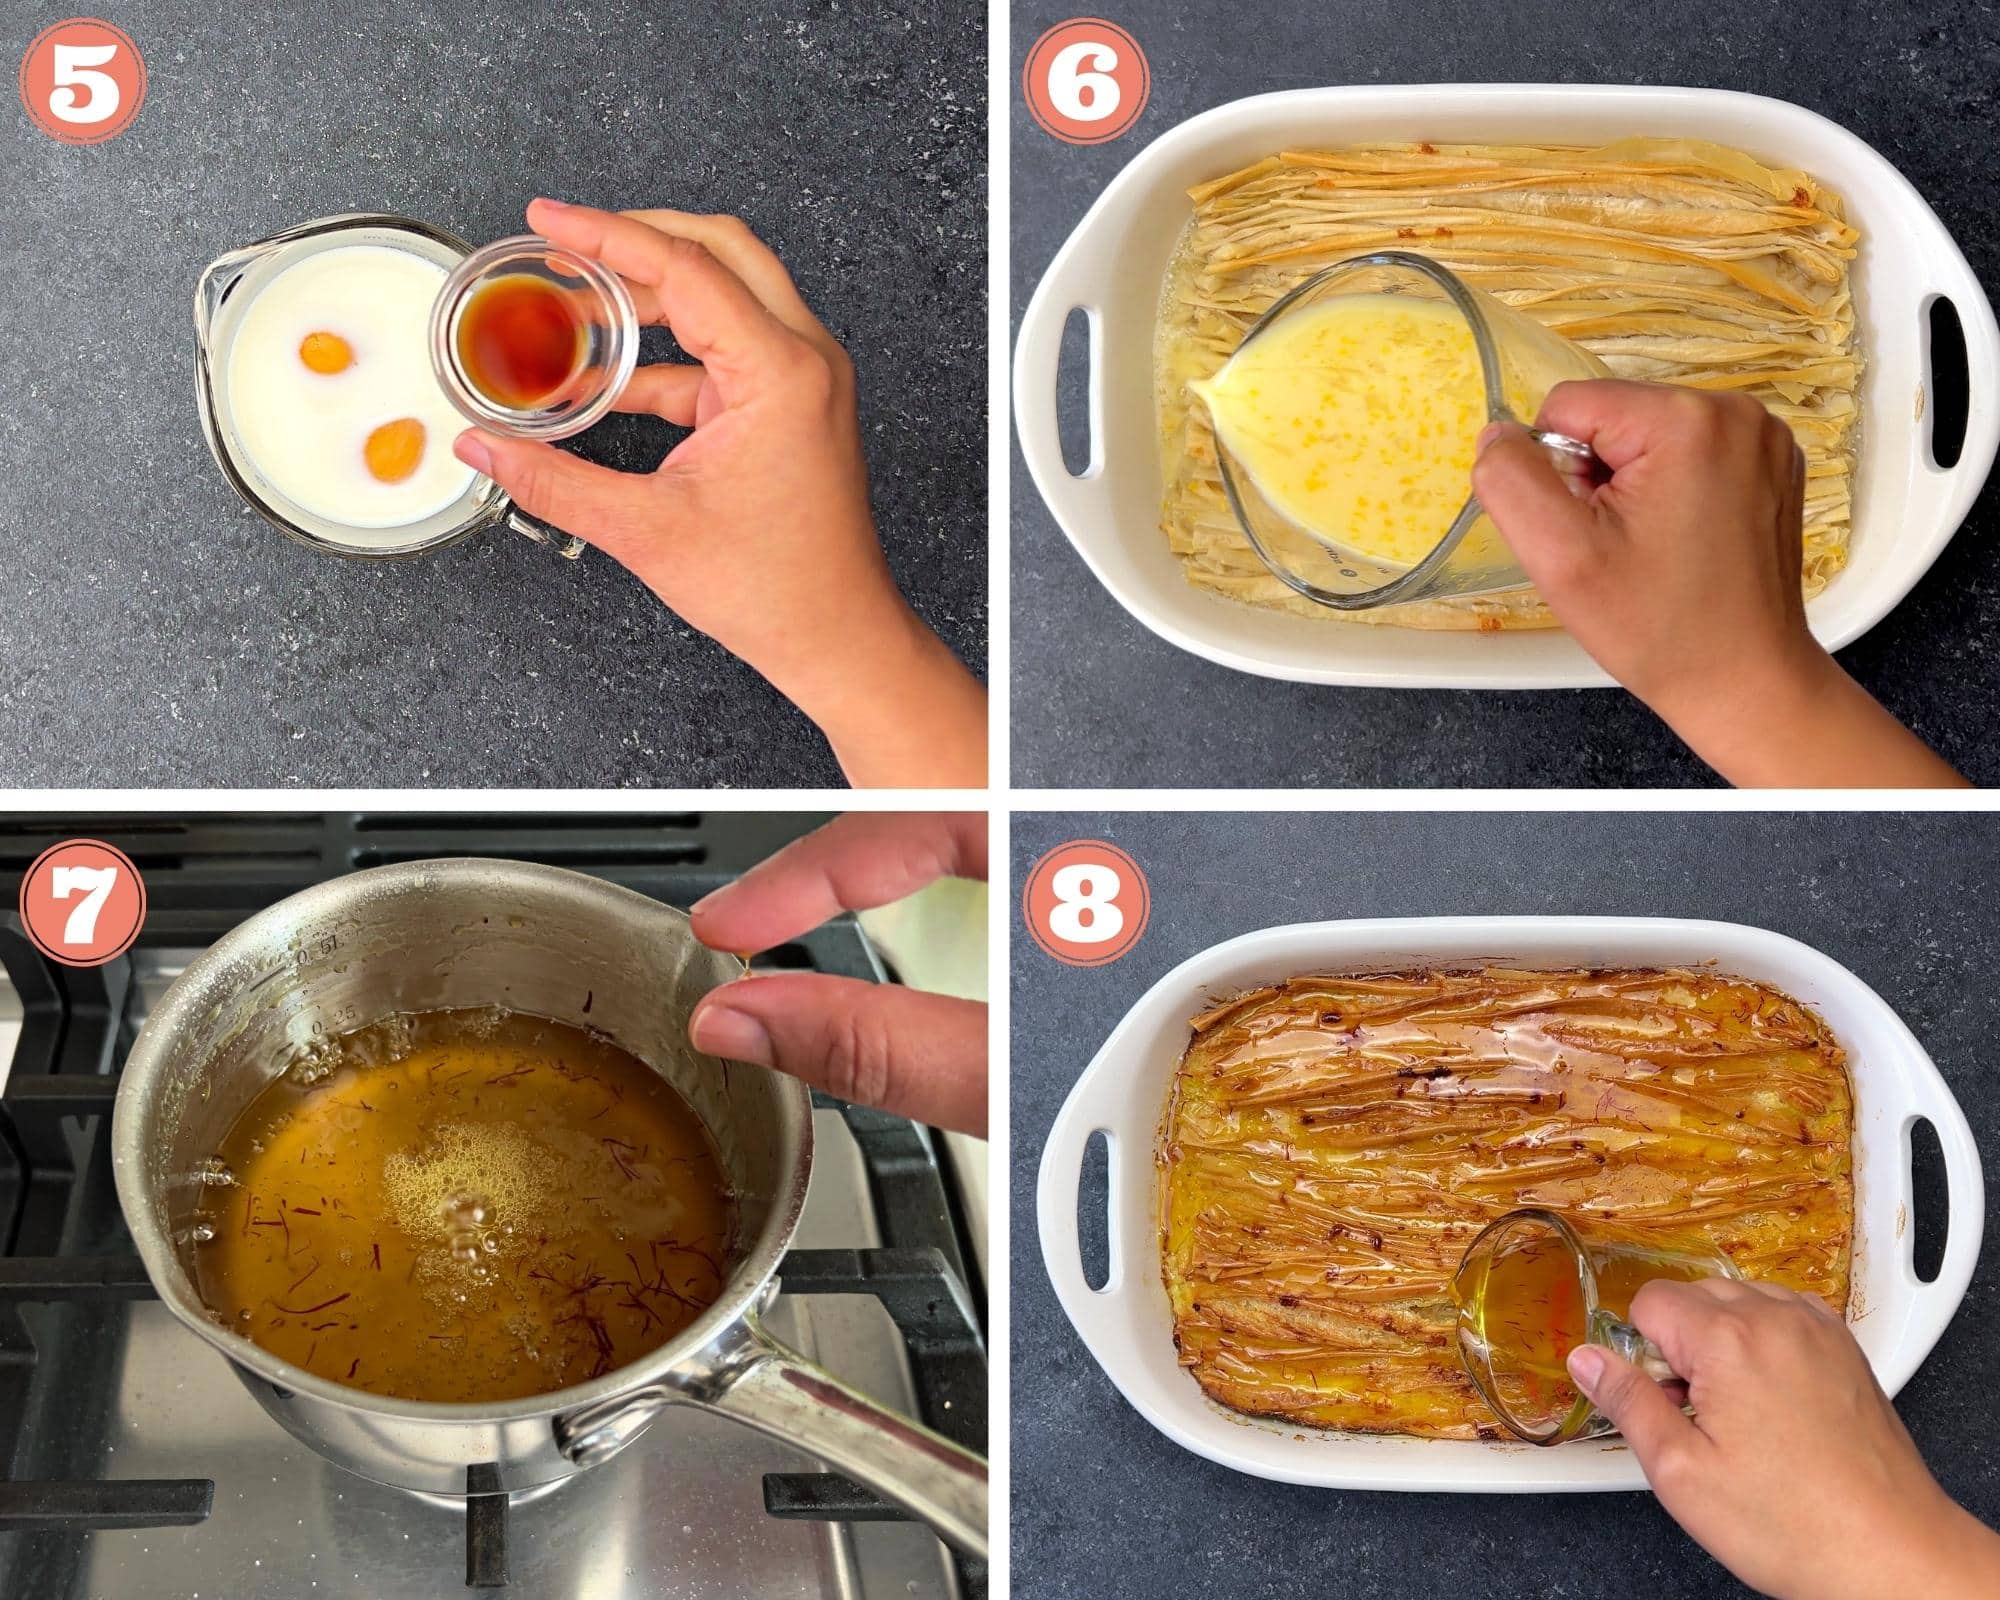 Steps 5-8 showing pouring custard, baking then topping crinkle cake